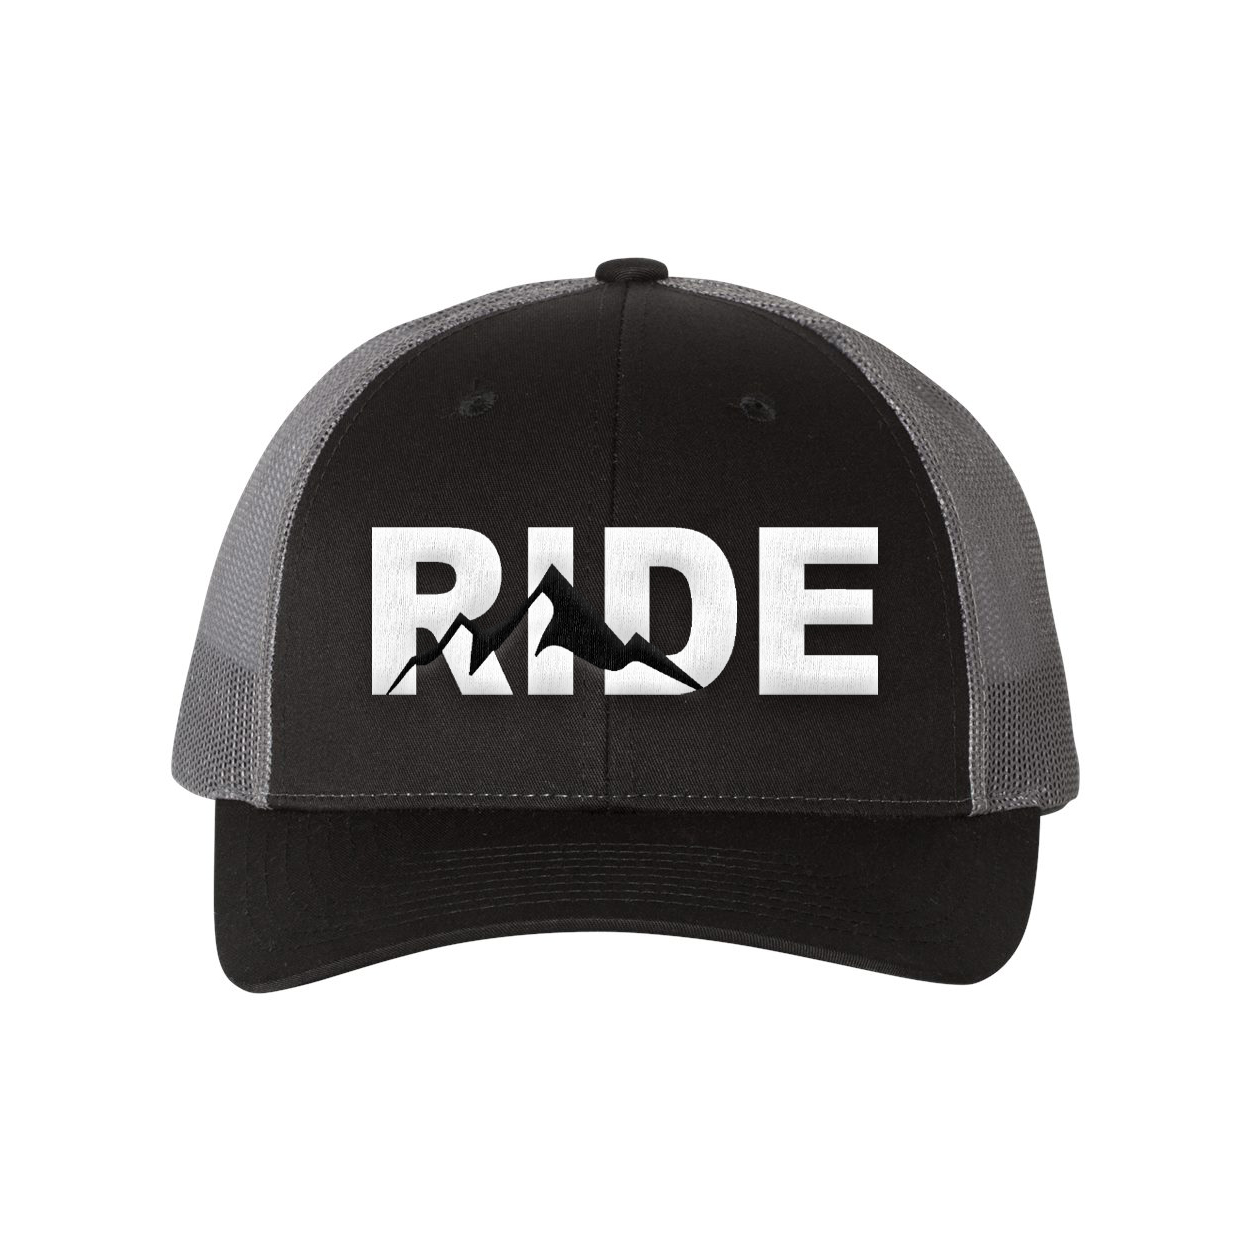 Ride Mountain Logo Classic Pro 3D Puff Embroidered Snapback Trucker Hat Black/Gray